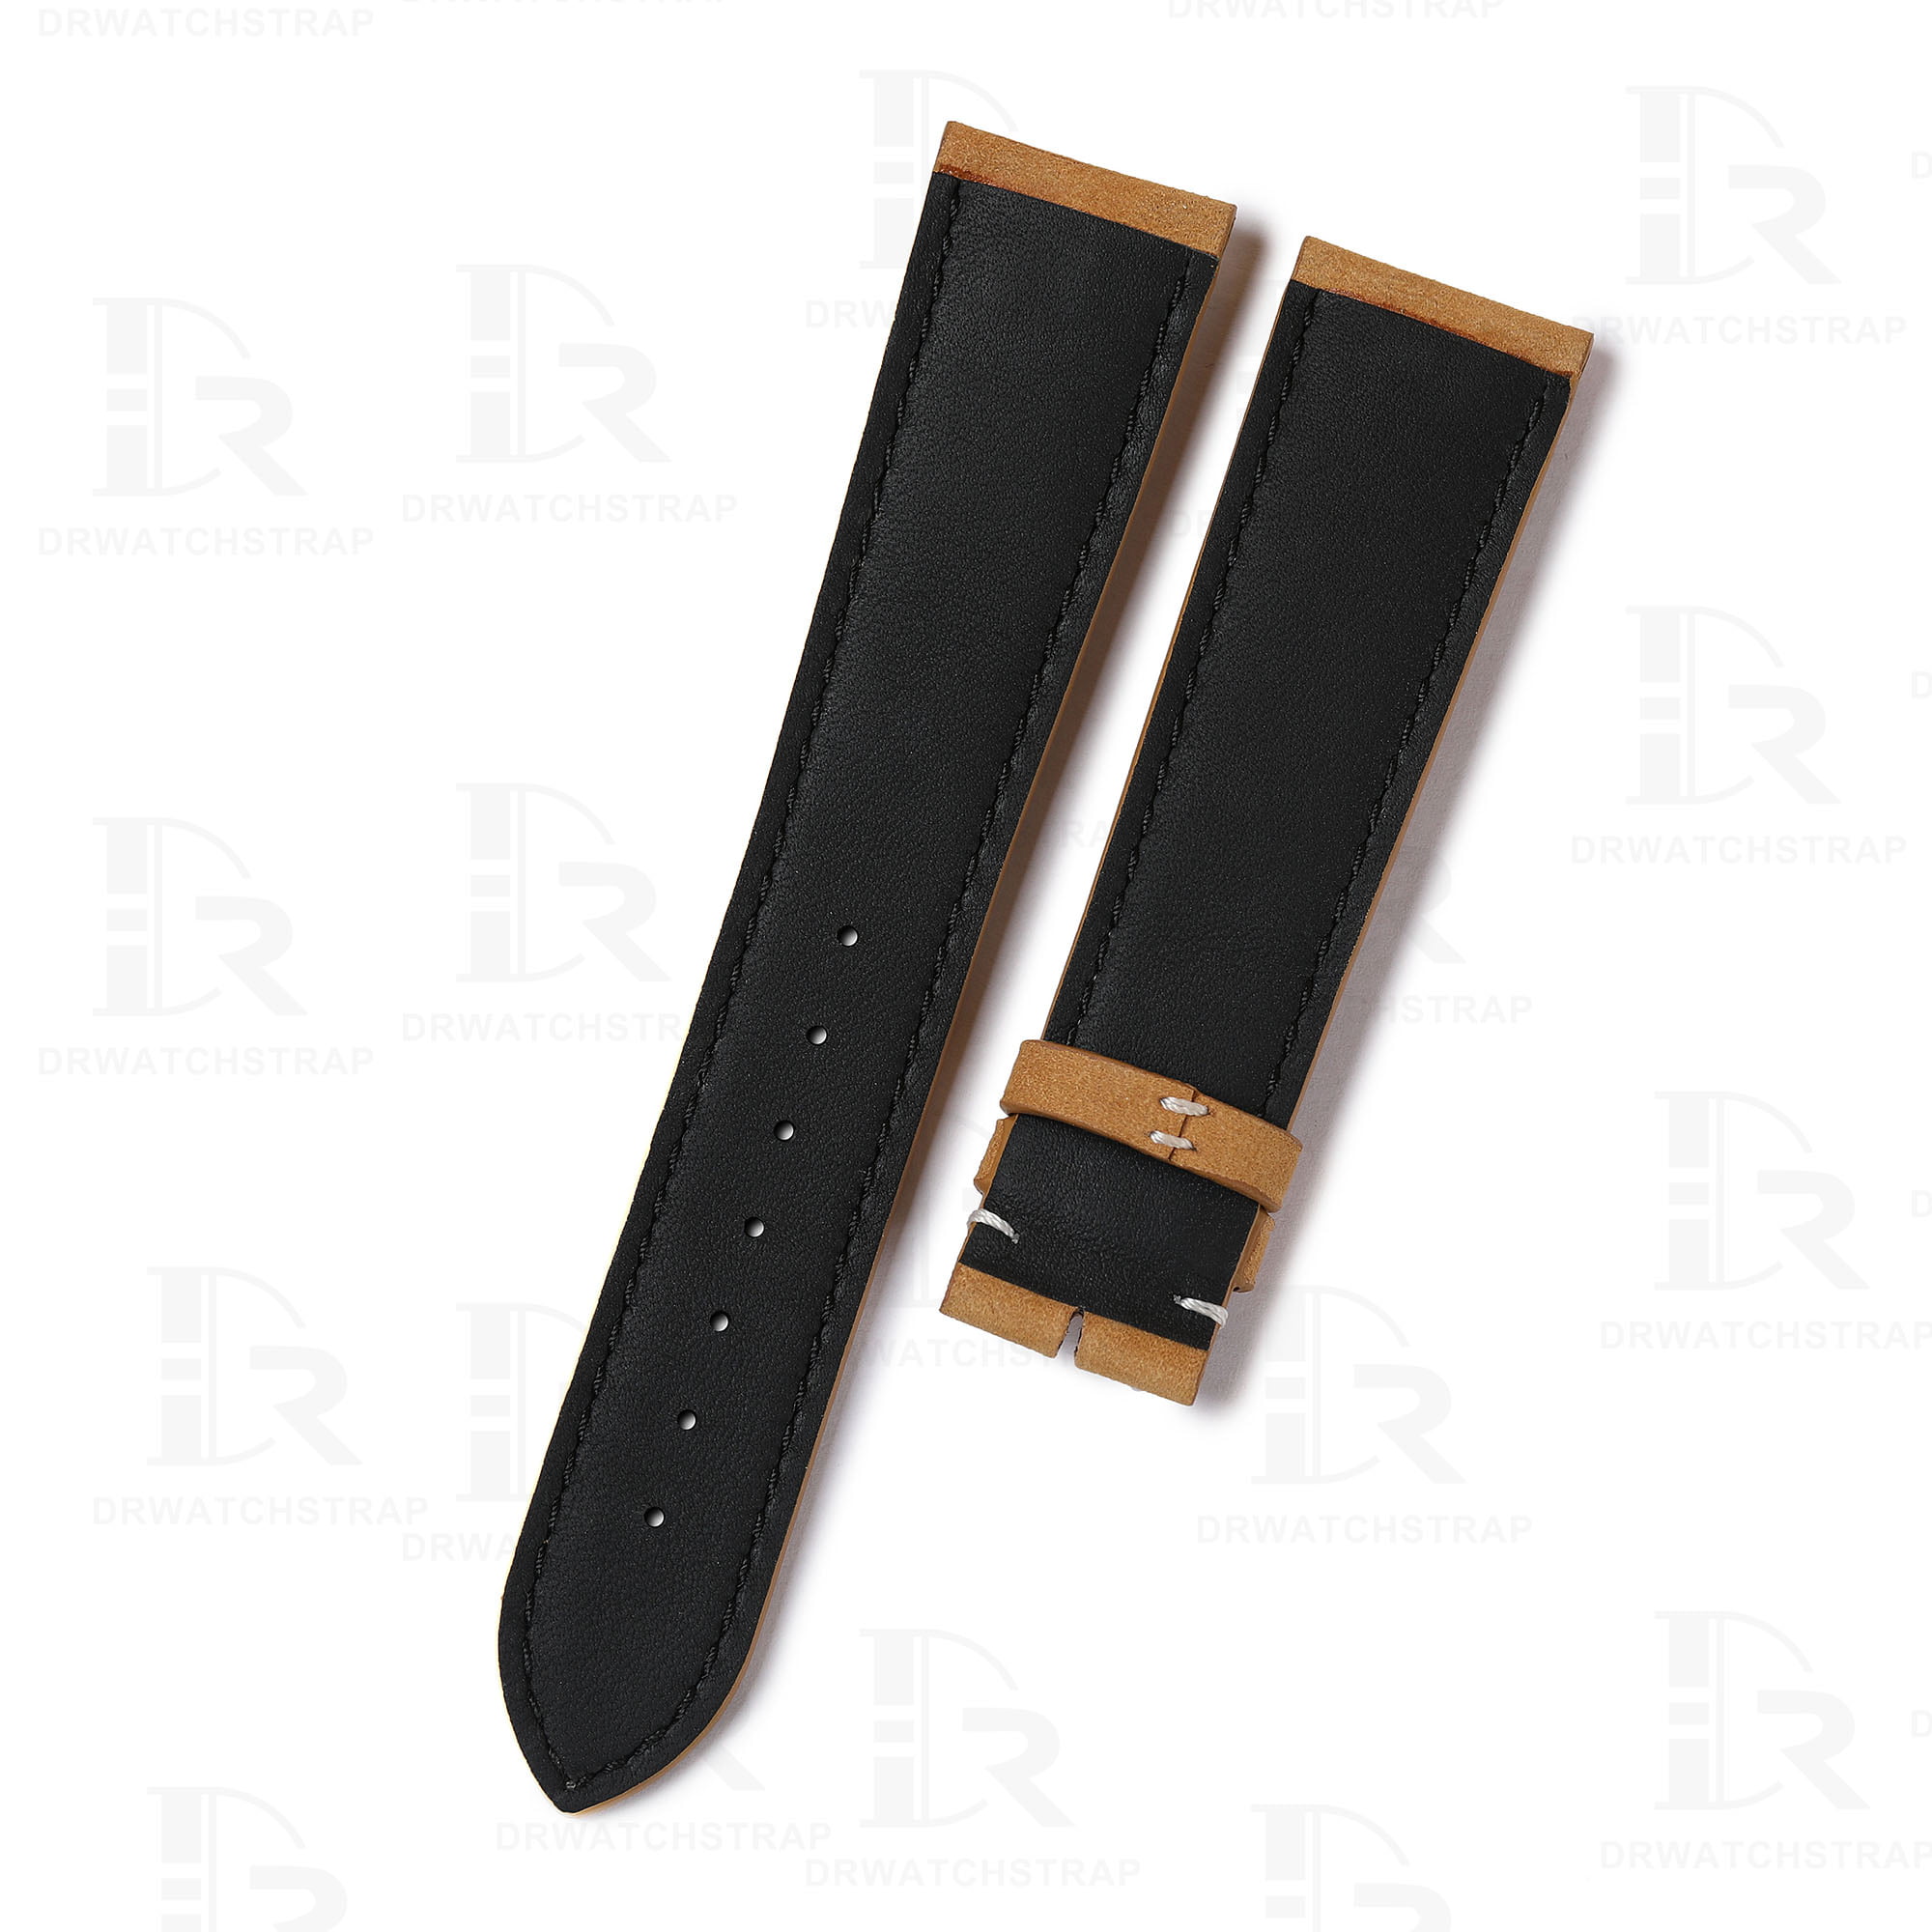 Best quality handmade OEM brown calfskin leather watch straps and watch bands replacement for Glashütte Glashutte Quintessentials luxury watches online - Shop the premium aftermarket calf leather strap and watchband at a low price